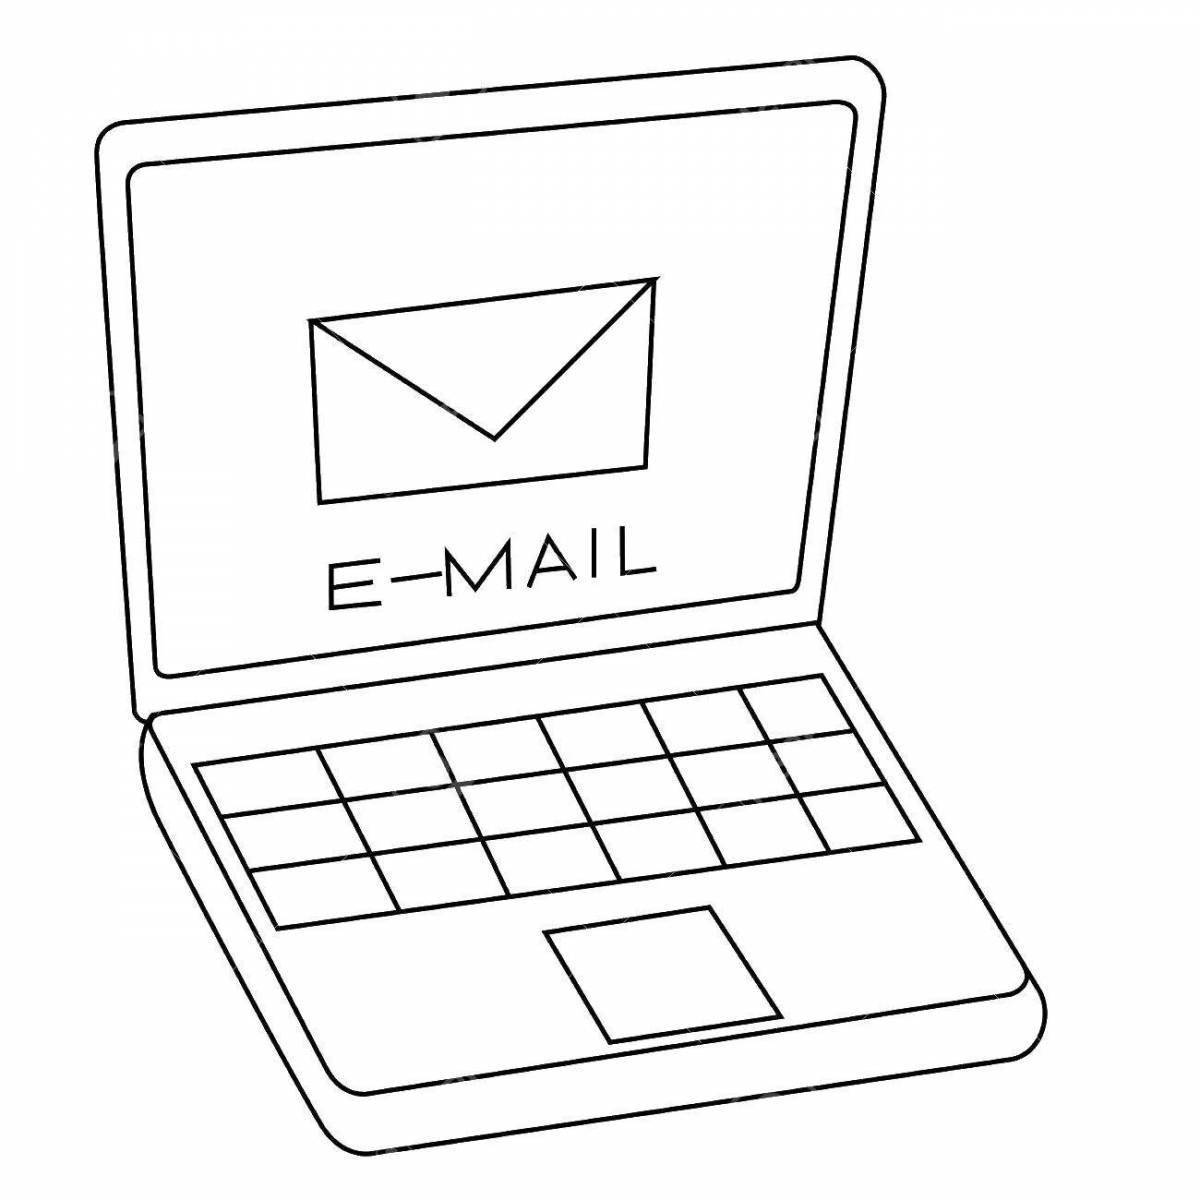 Email coloring page